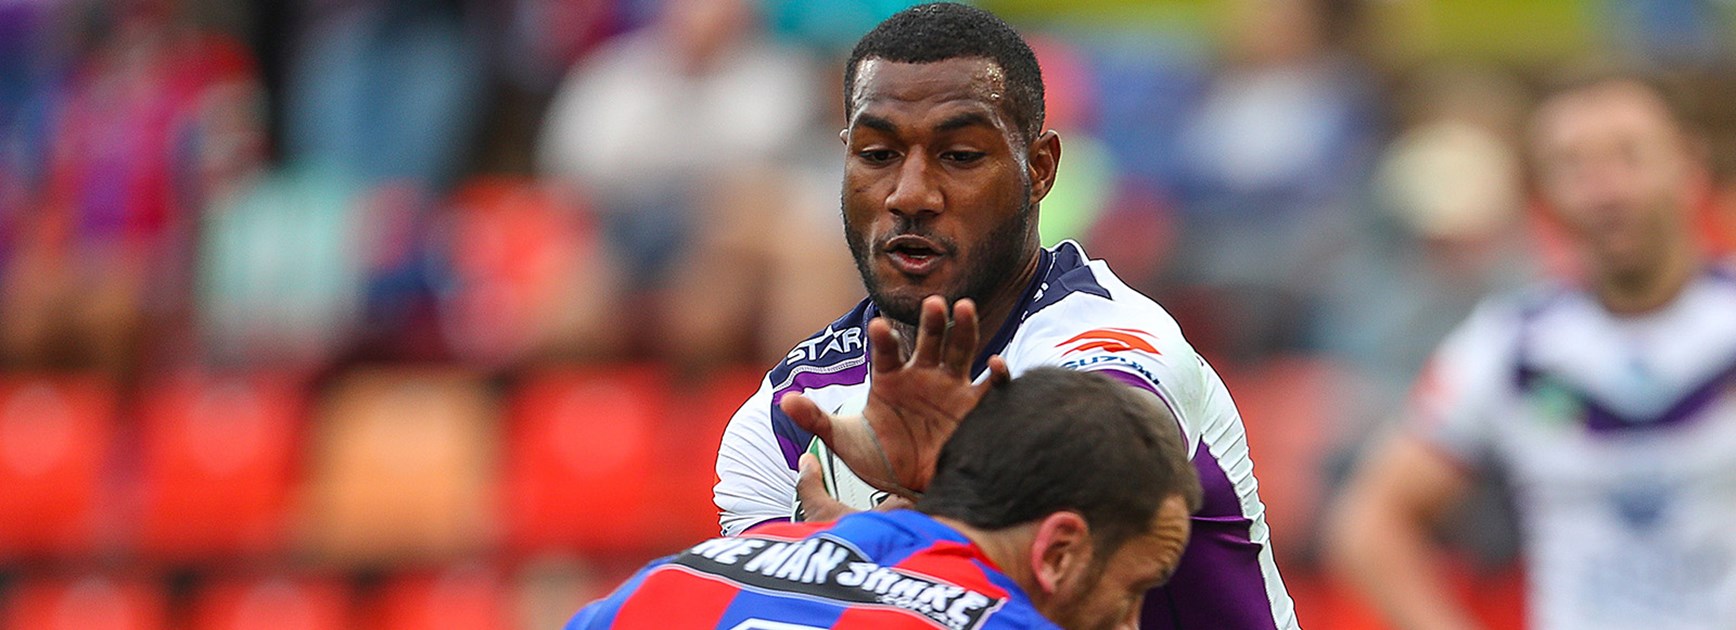 Suliasi Vunivalu scored another try in Round 19 against the Knights.